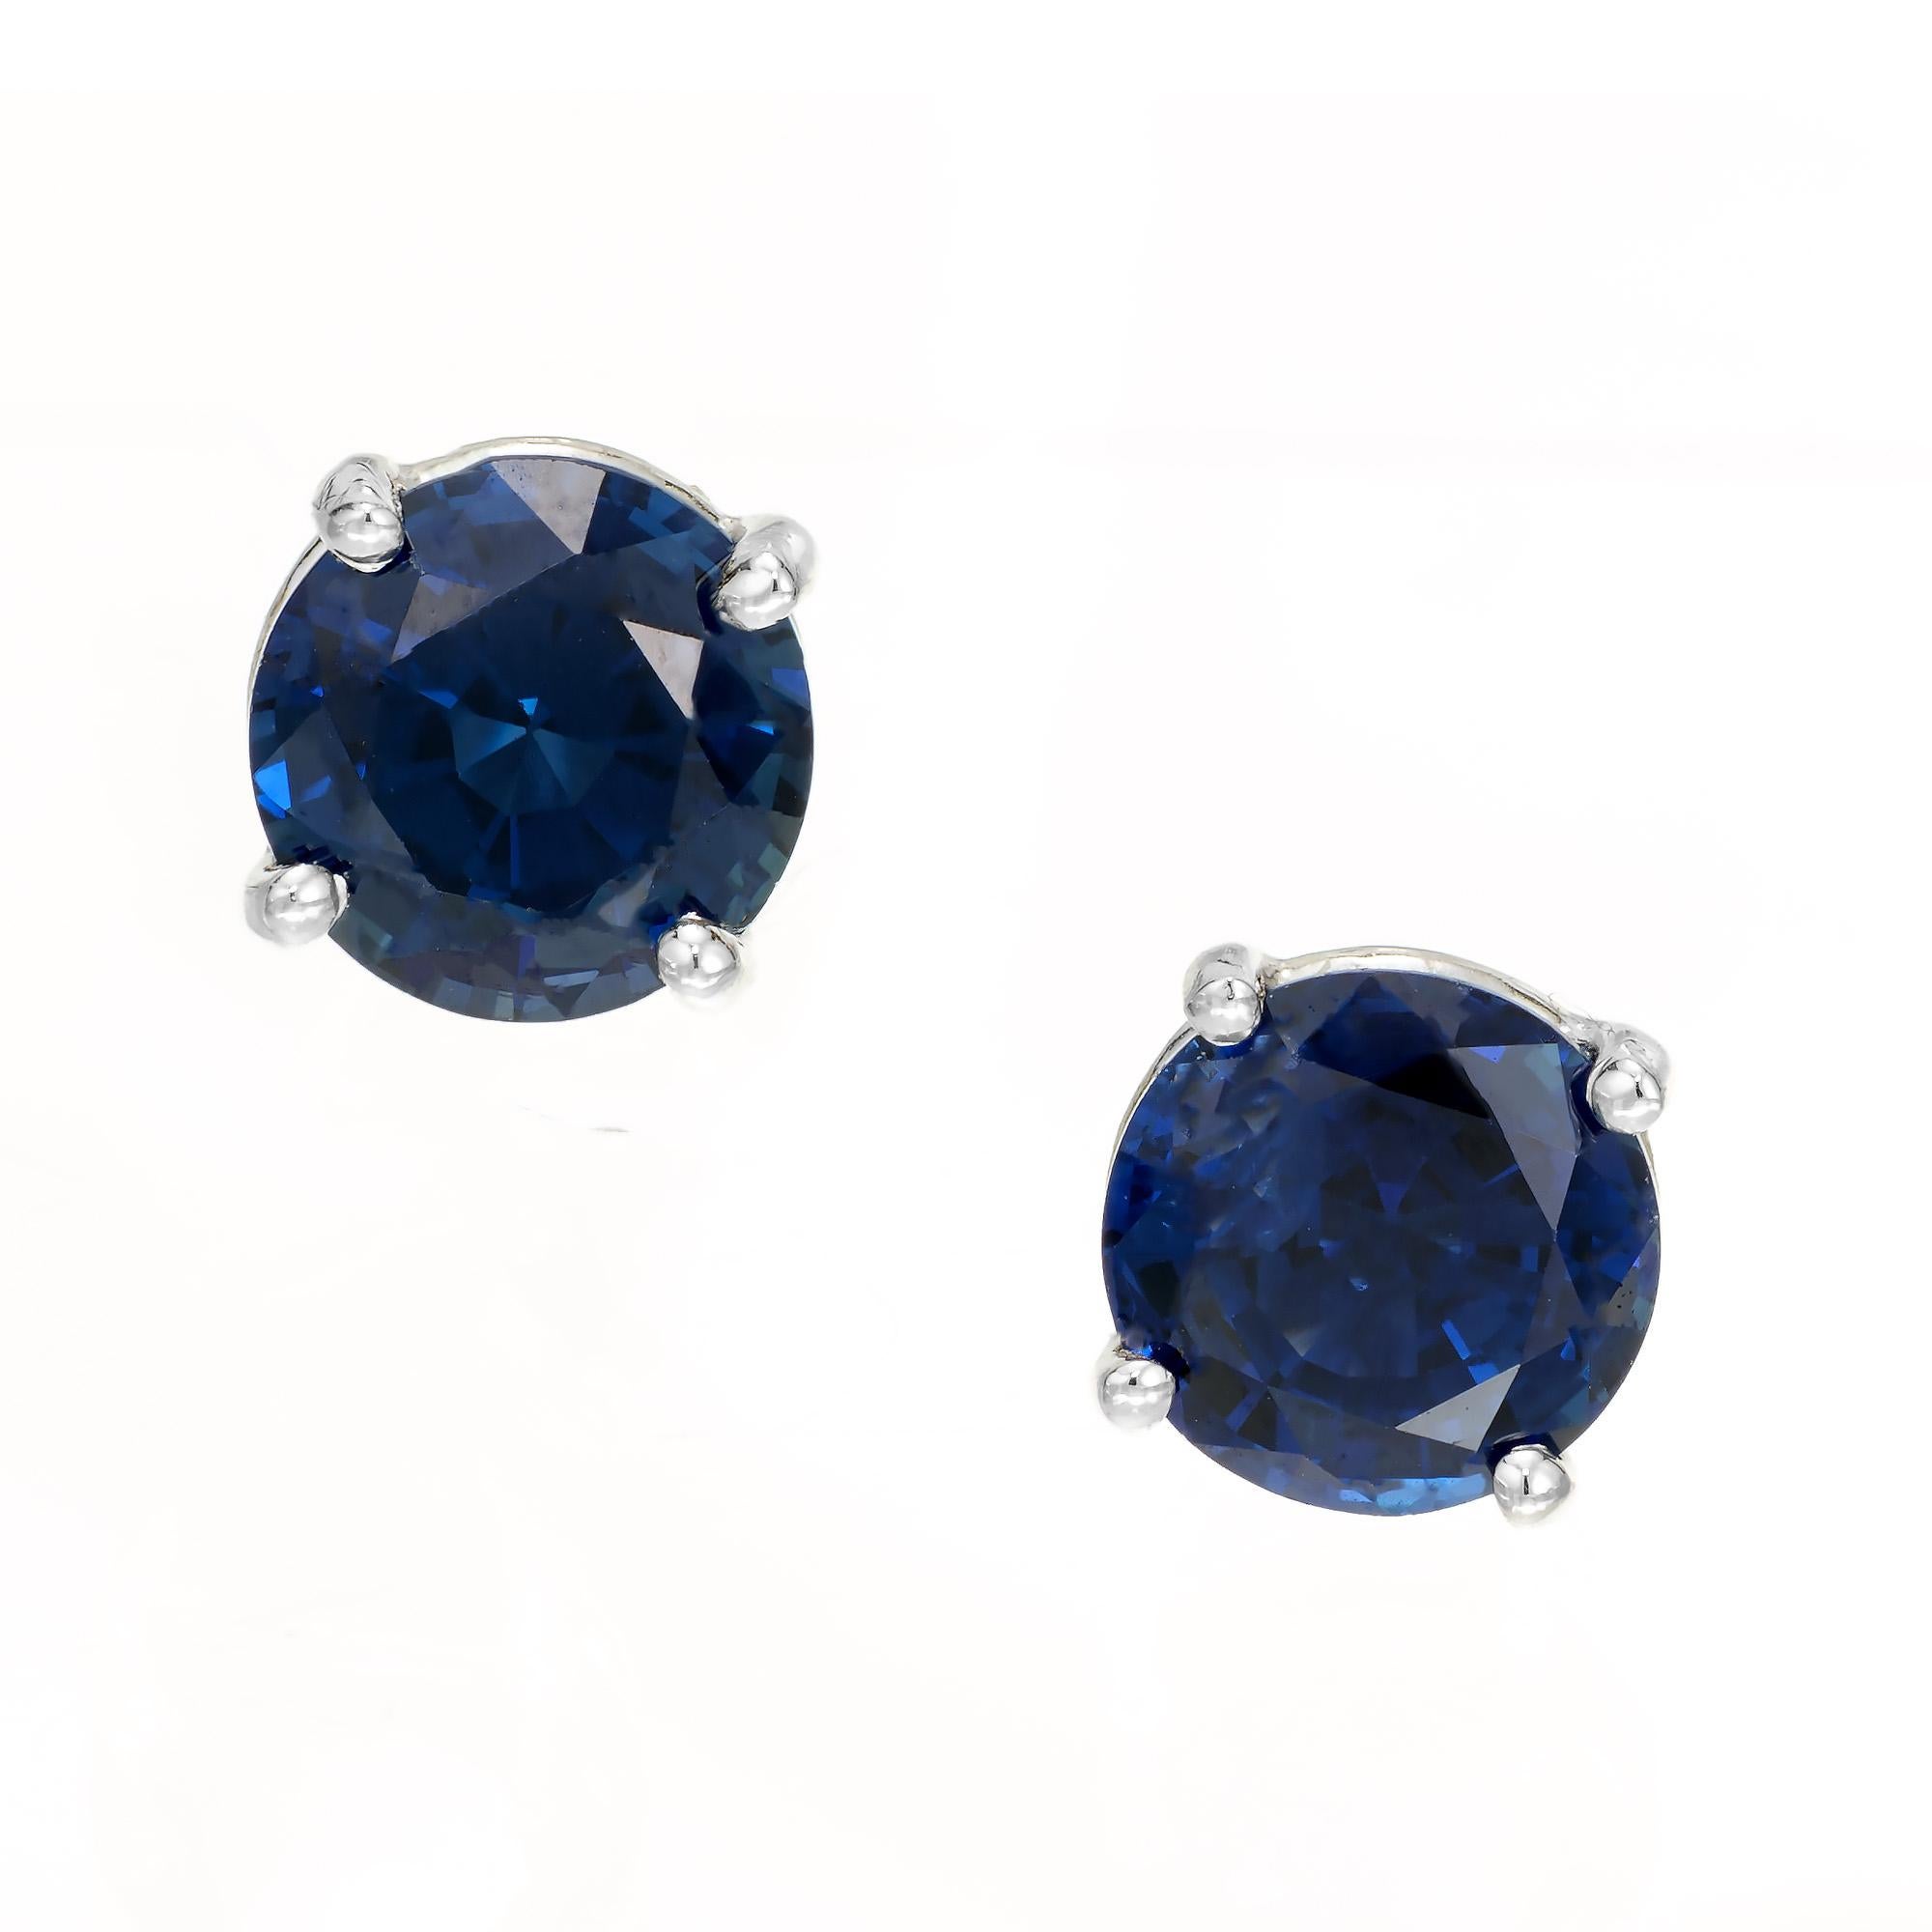 Rich blue round sapphire stud earrings.  2.24 carat round sapphires in a classic platinum 4 prong basket settings. Designed and crafted in the Peter Suchy Workshop.

2 round blue sapphires, SI approx. 2.24cts
Platinum 
1.71 grams
Top to bottom: